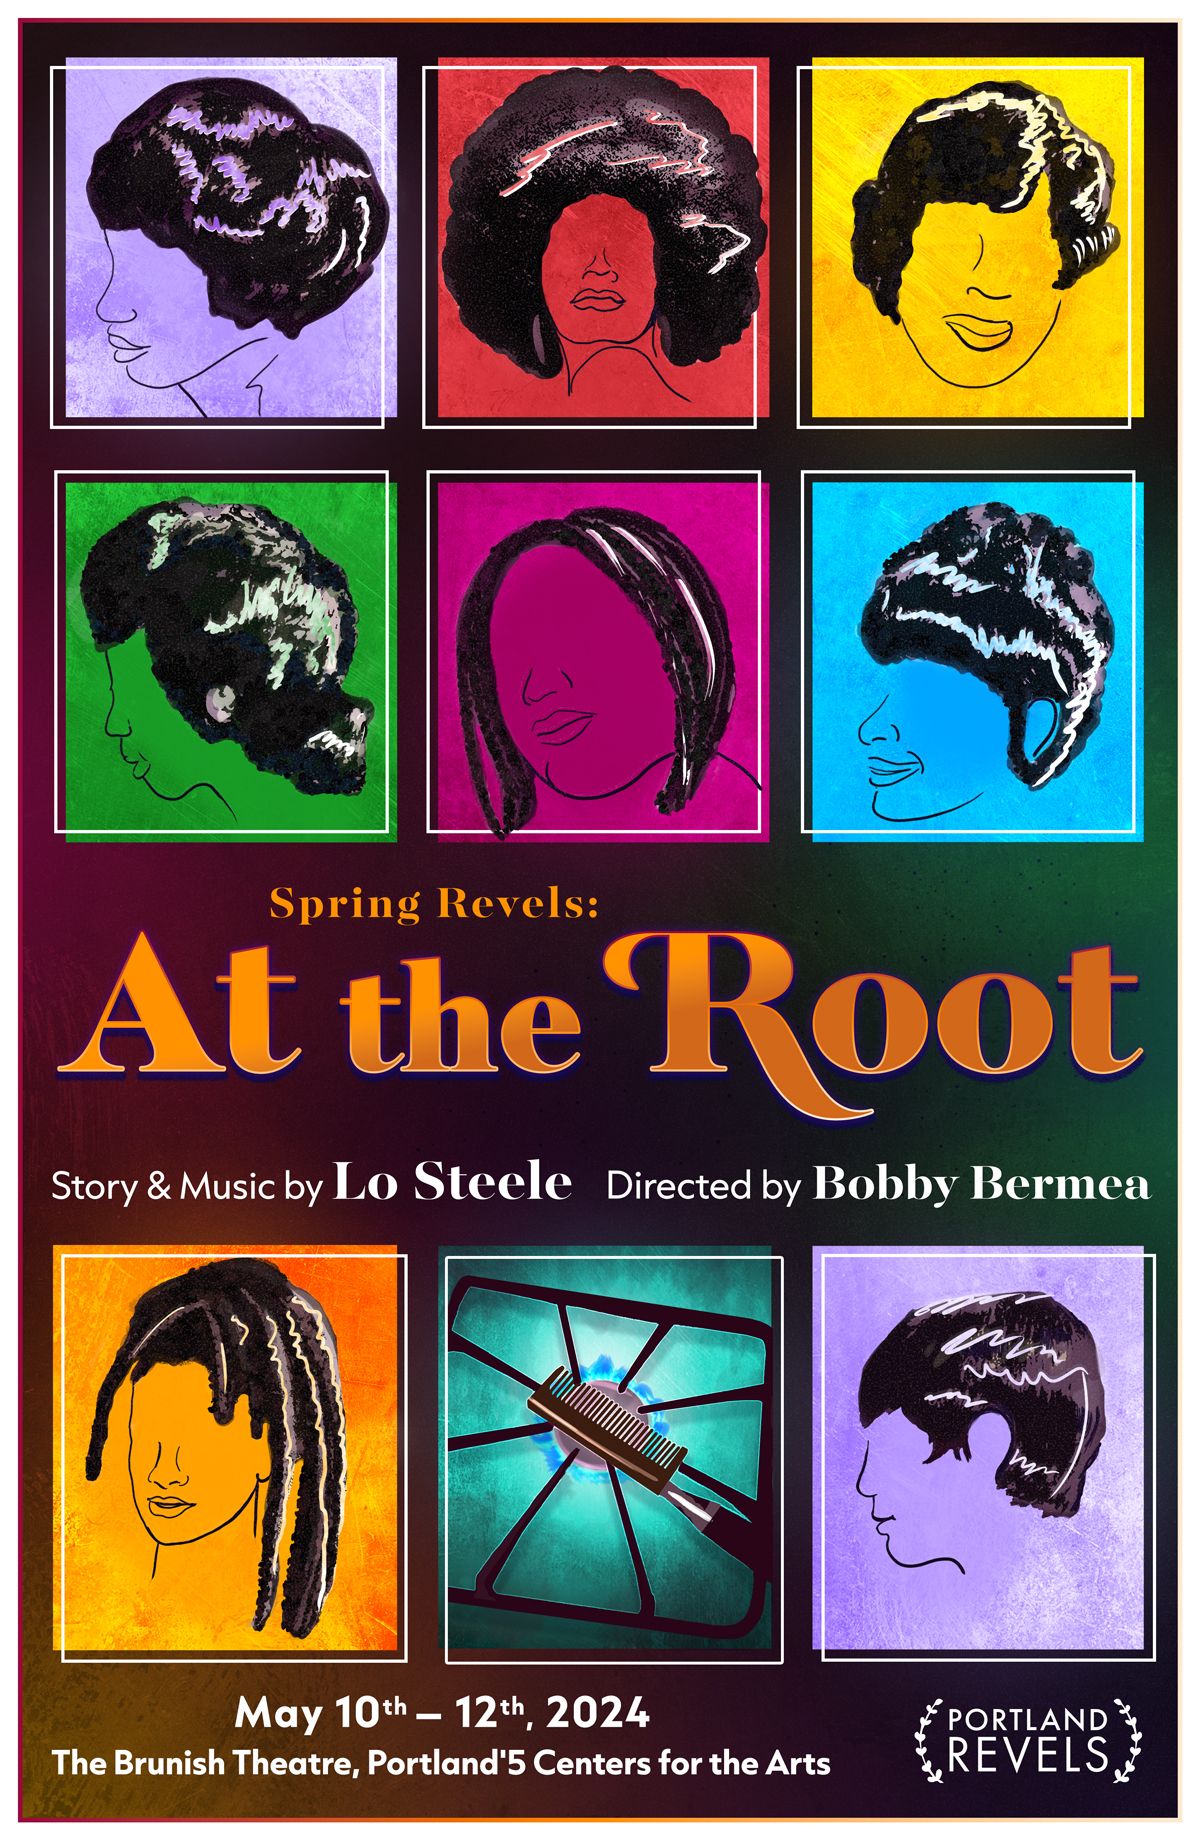 Spring Revels: At the Root